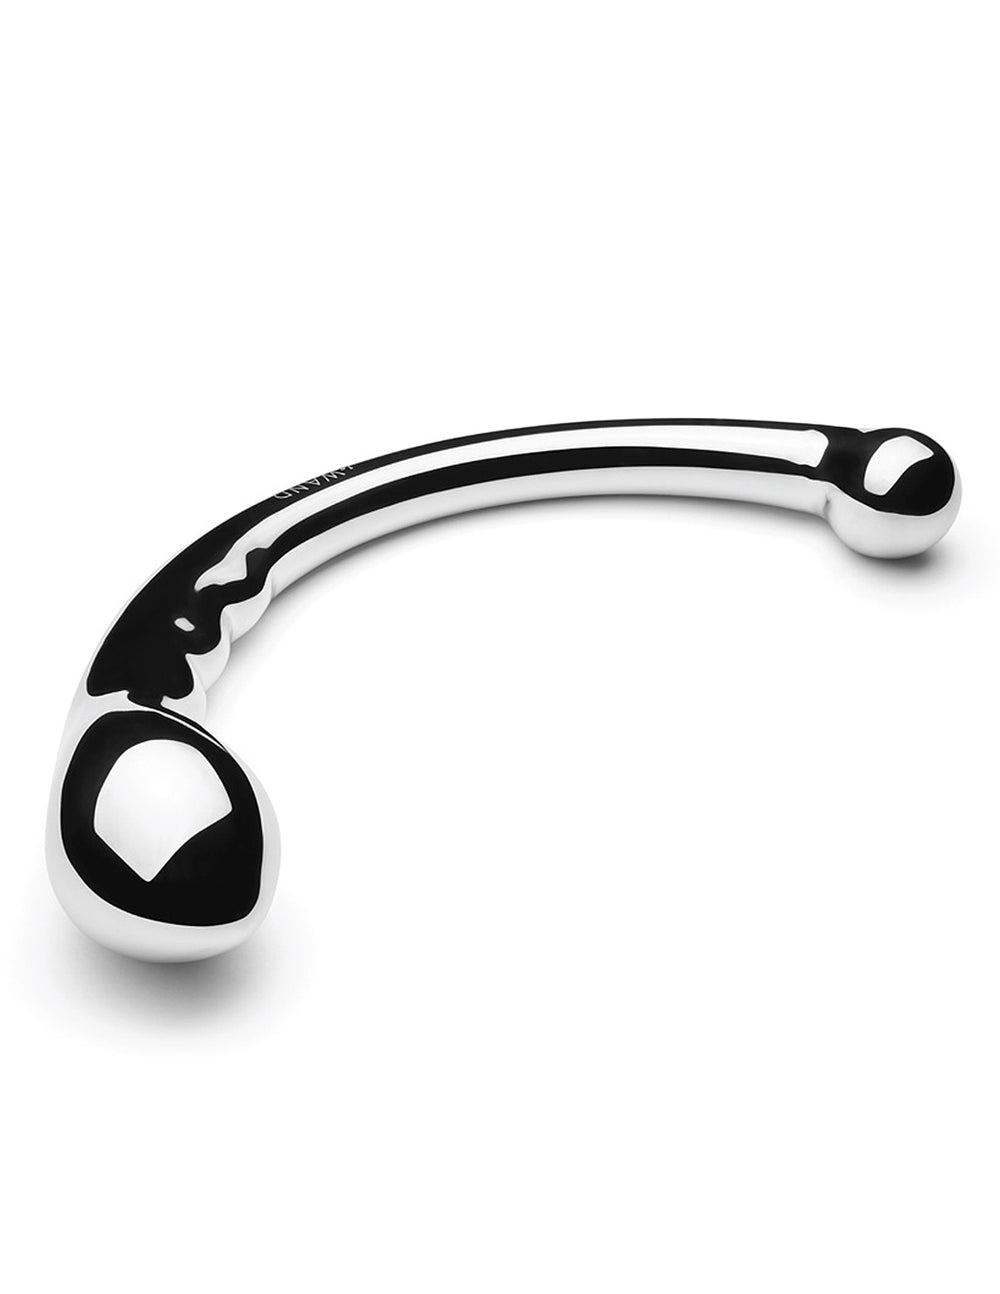 Le Wand Hoop Stainless Steel Double Ended Dildo Sex Toys At Hustler Hollywood